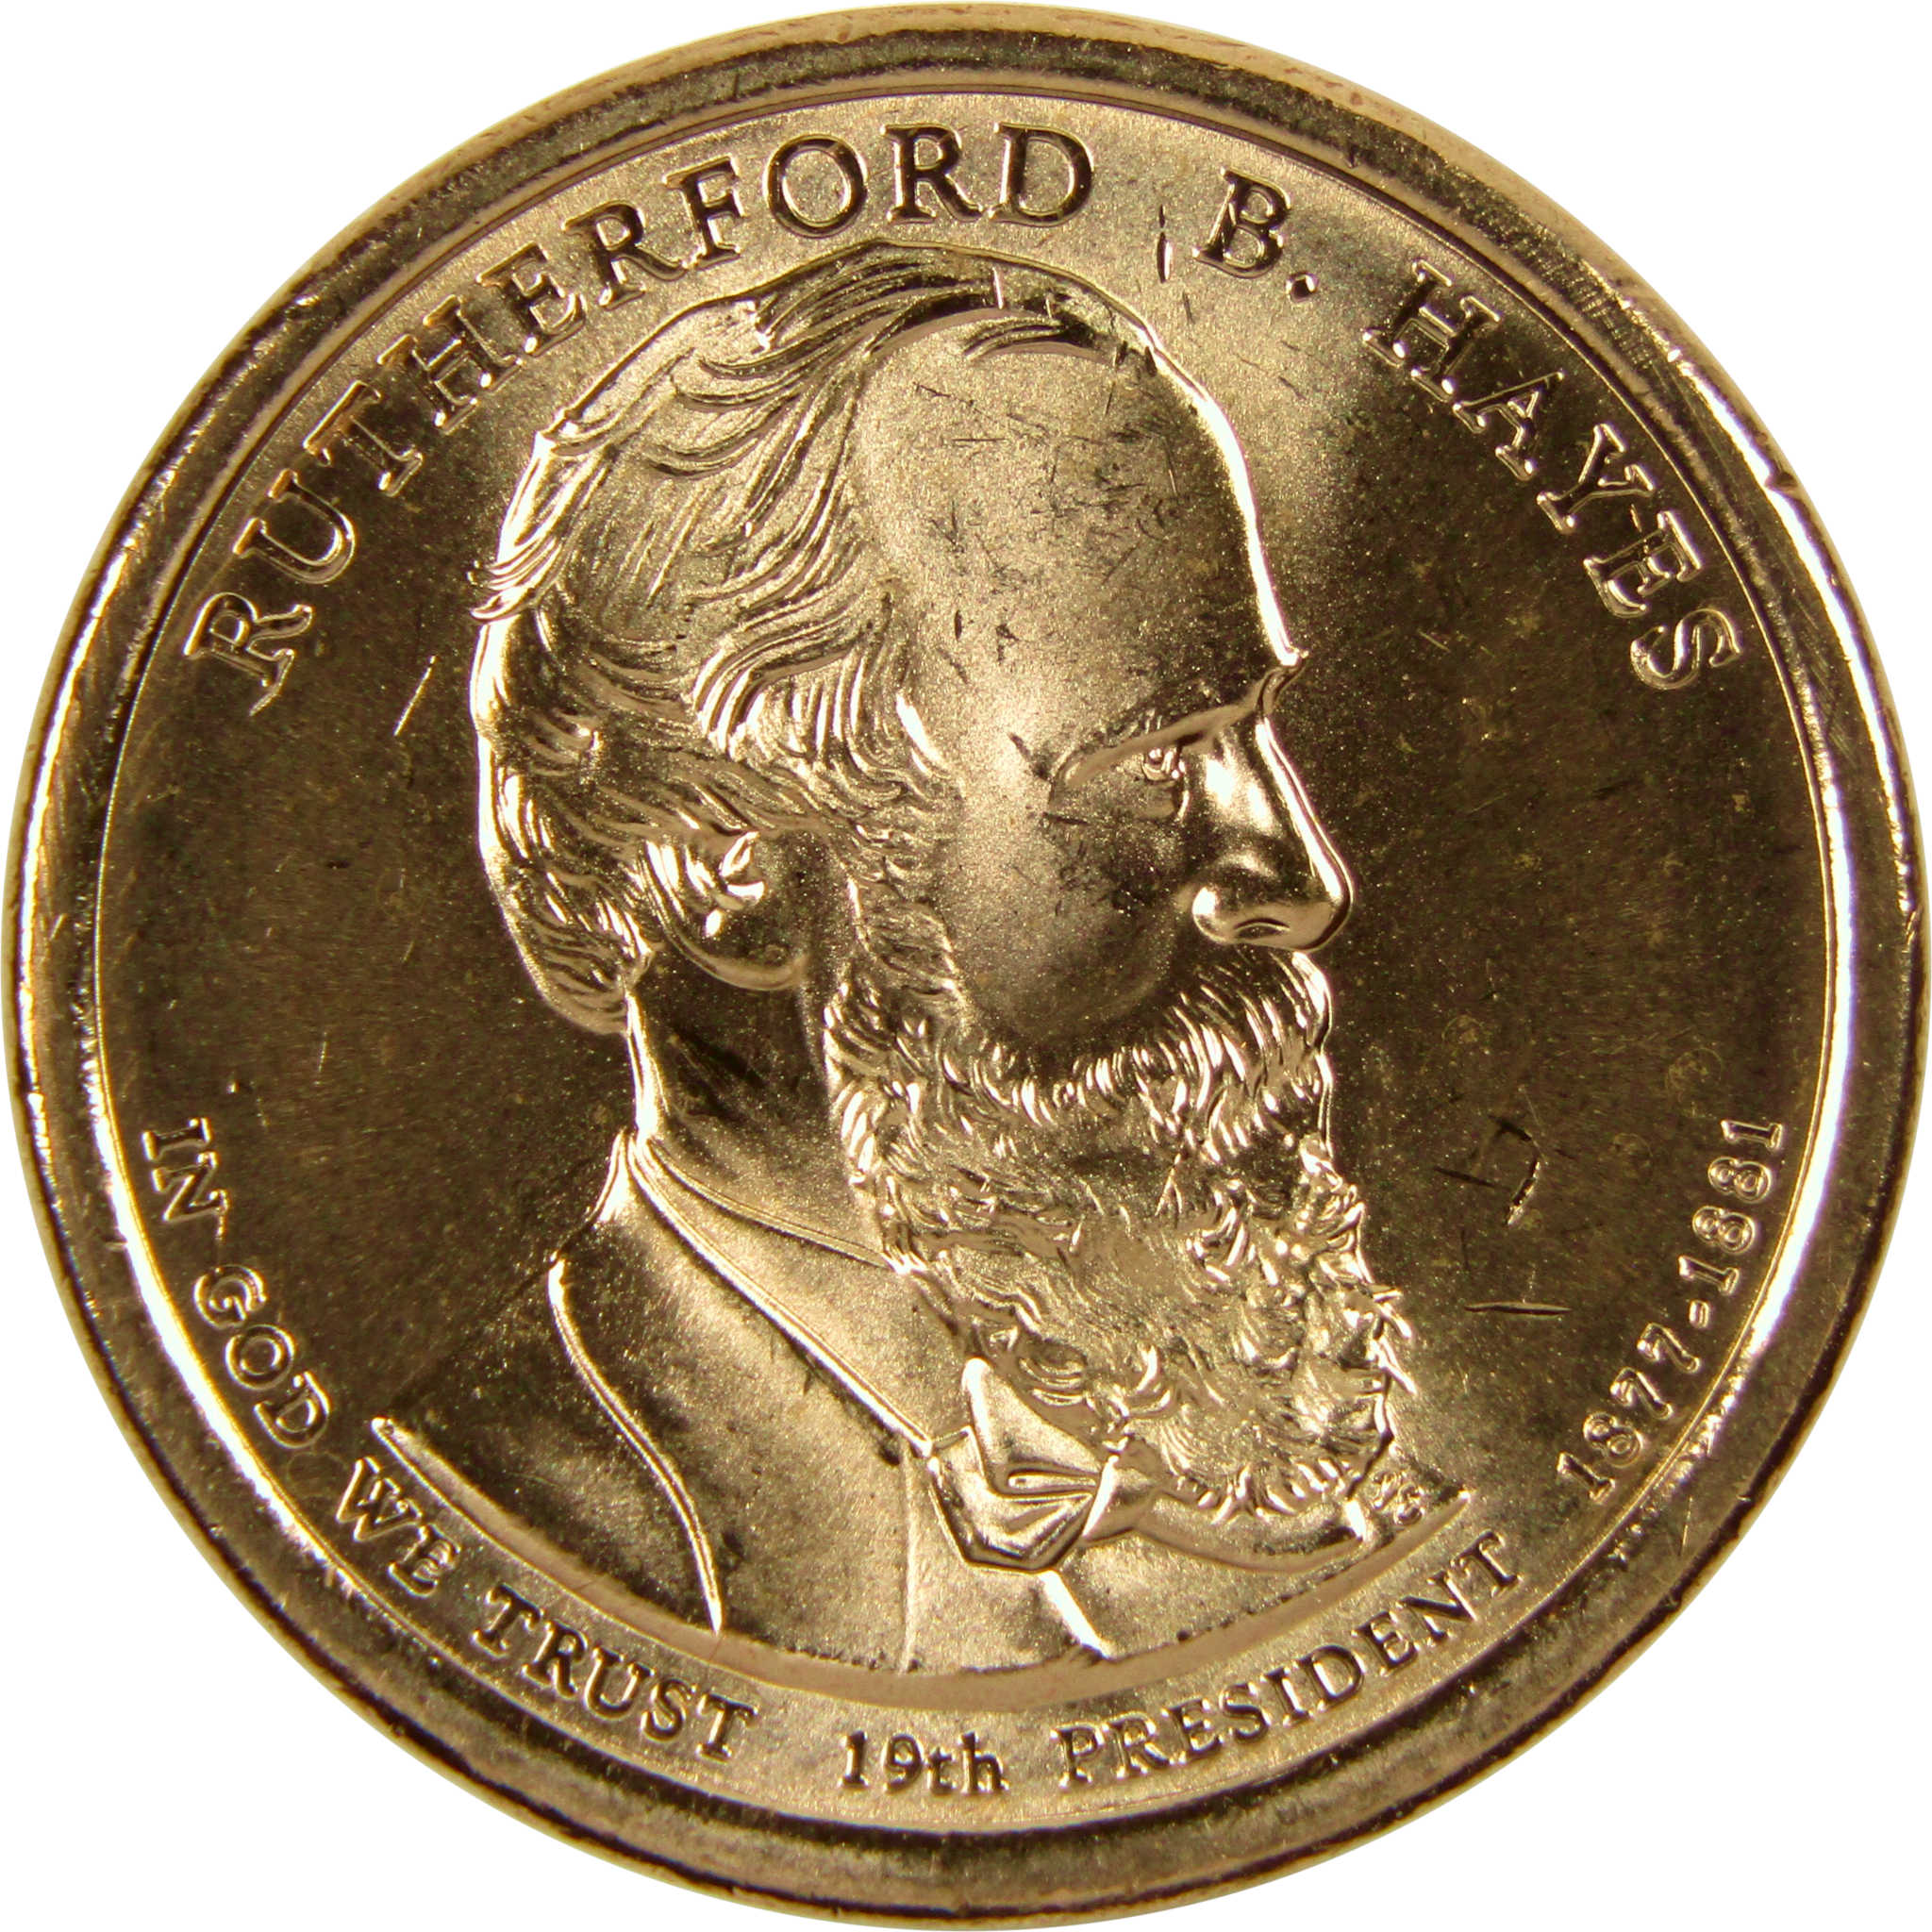 2011 D Rutherford B. Hayes Presidential Dollar BU Uncirculated $1 Coin